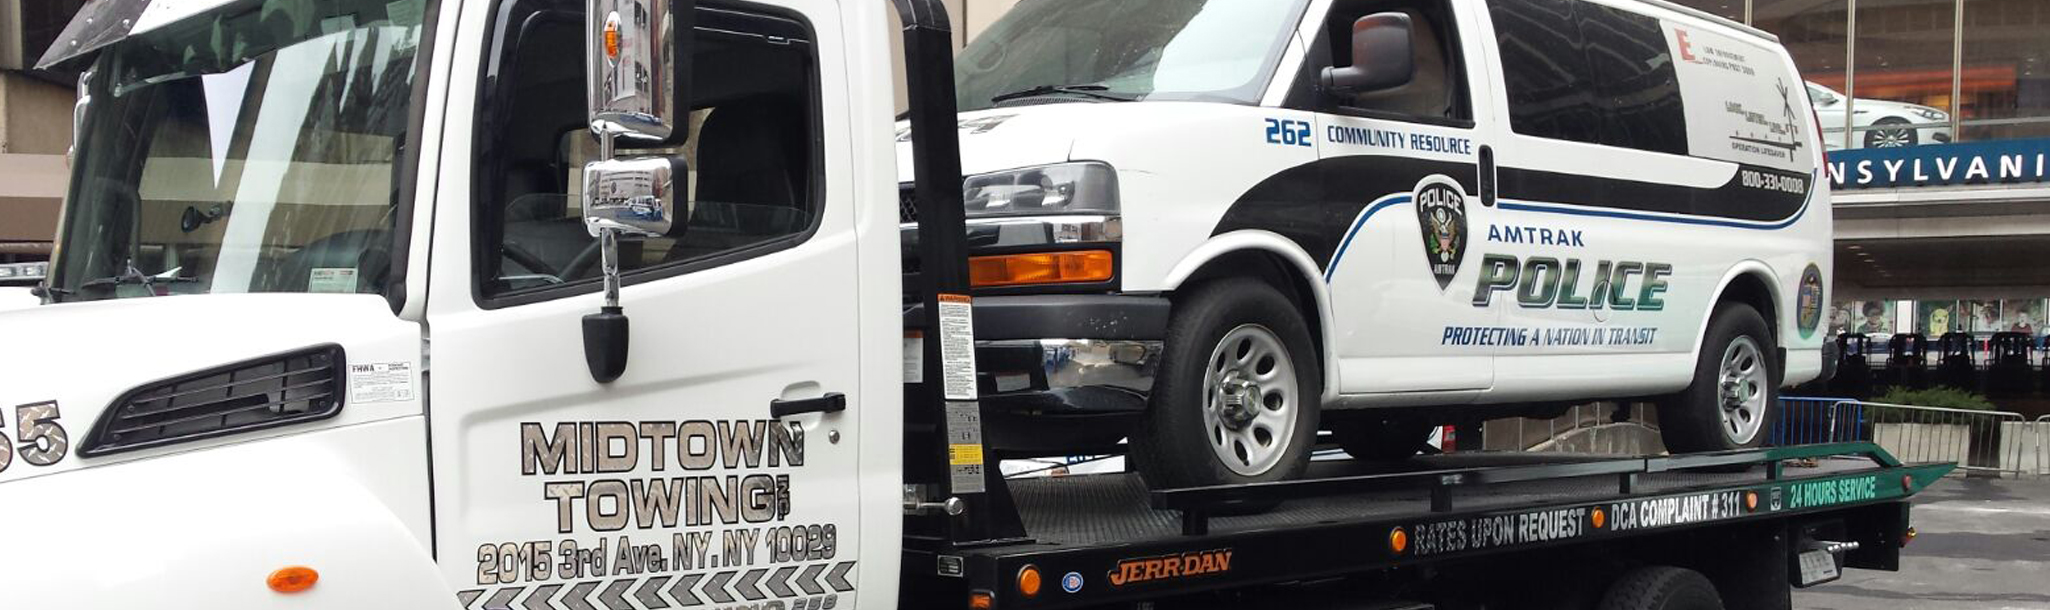 Midtown Towing NYC | Car, Suv, Heavy Truck, 24/7 Towing Service NYC